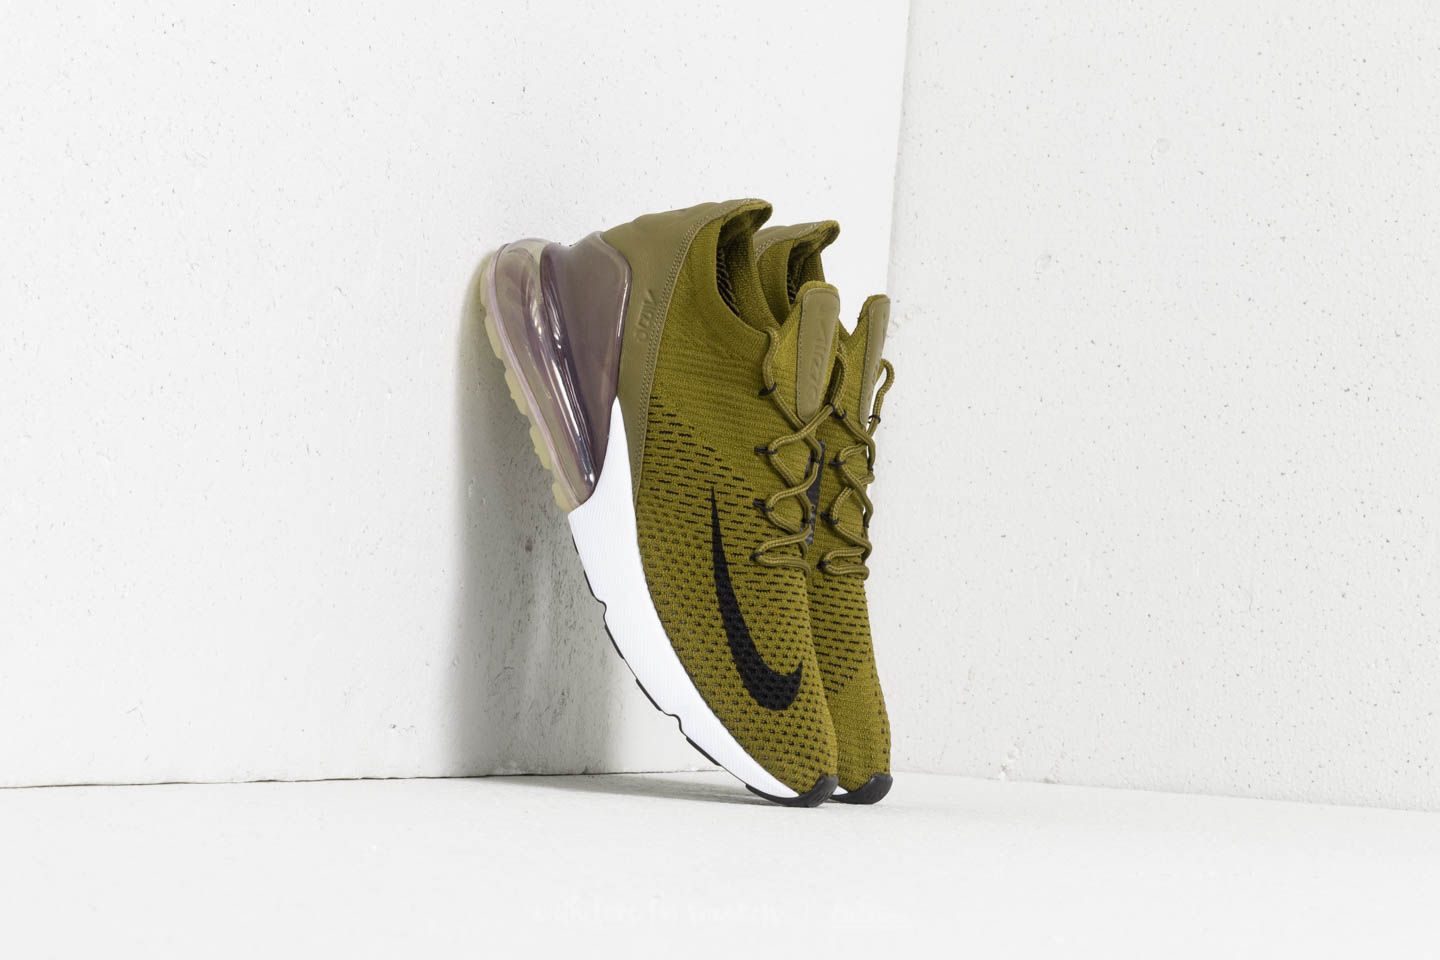 Chaussures et baskets homme Nike Air Max 270 Flyknit Olive Flak/ Black-Sepia Stone